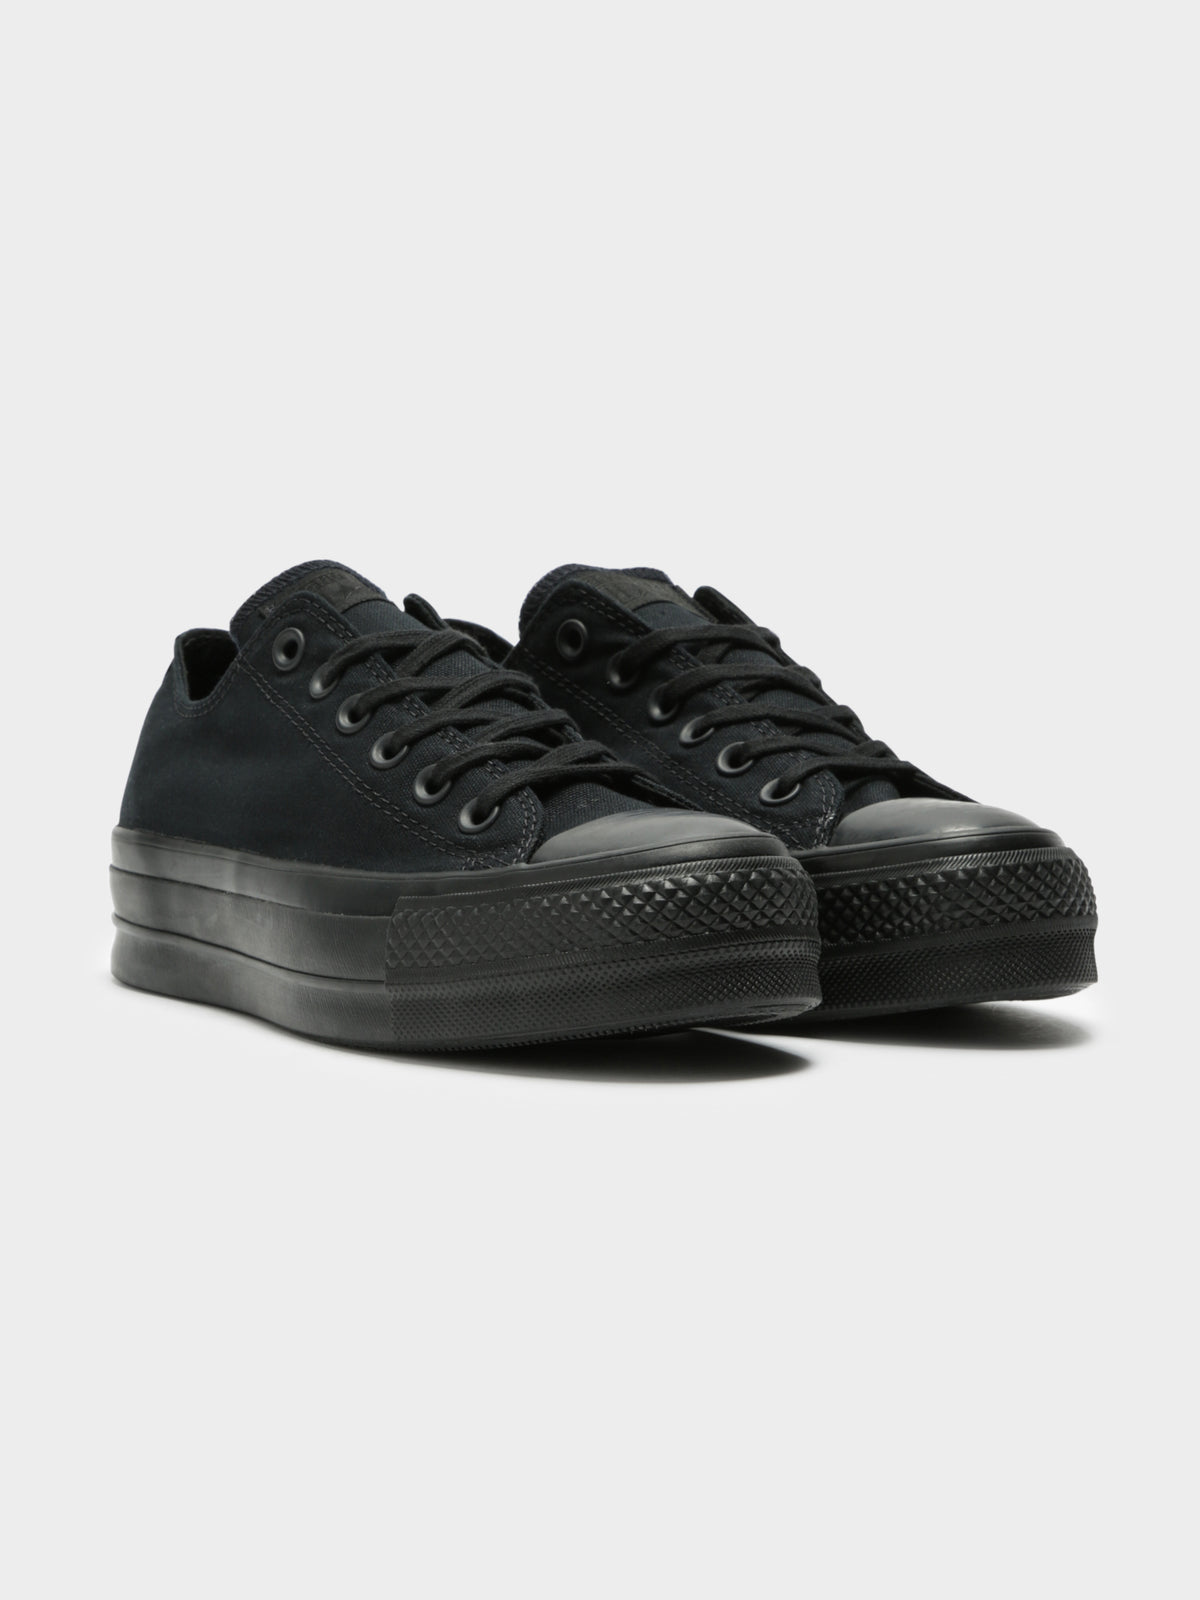 Womens Chuck Taylor All Star Lift Platform Sneakers in Ox Black